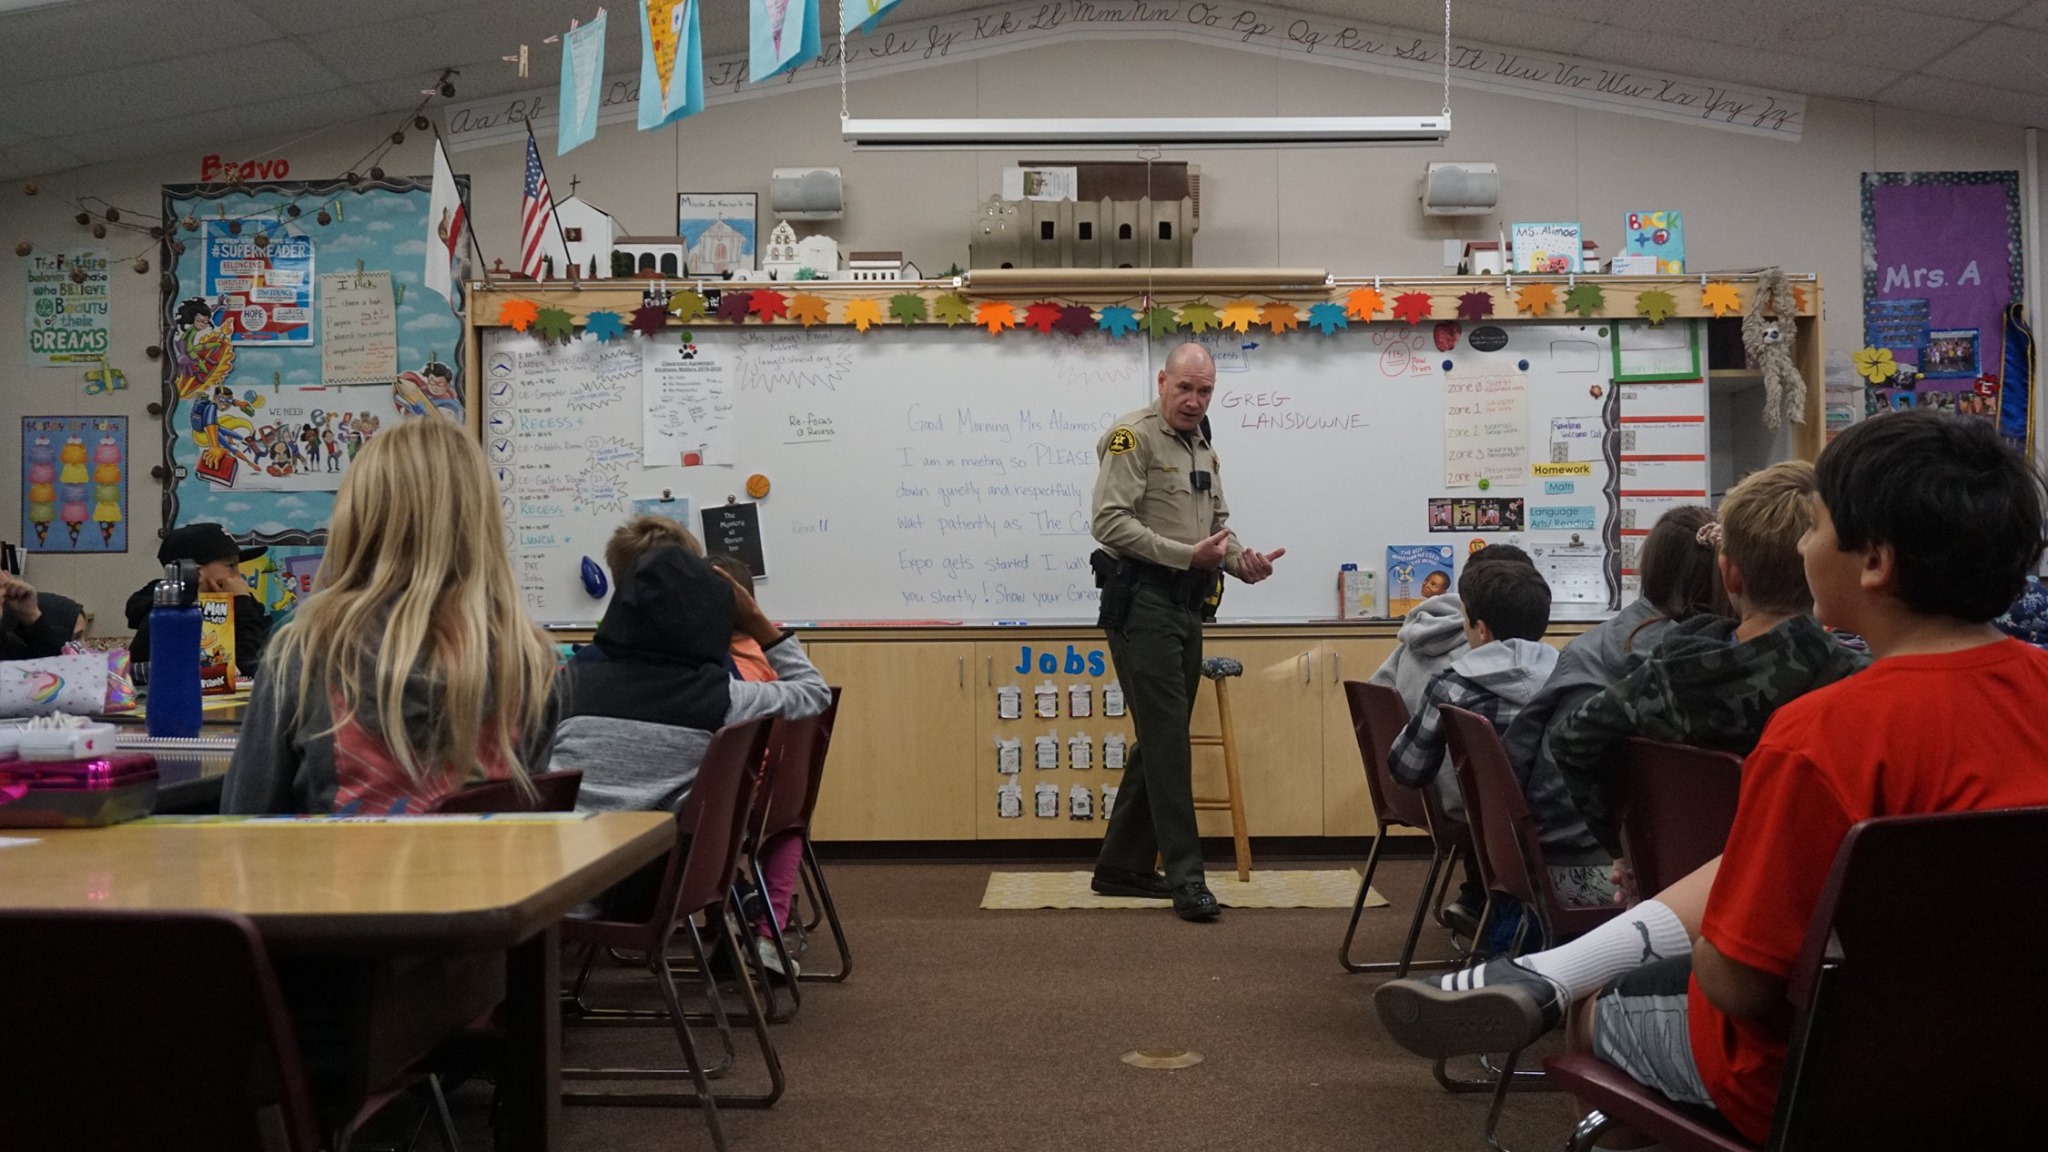 Officer talking to students in classroom